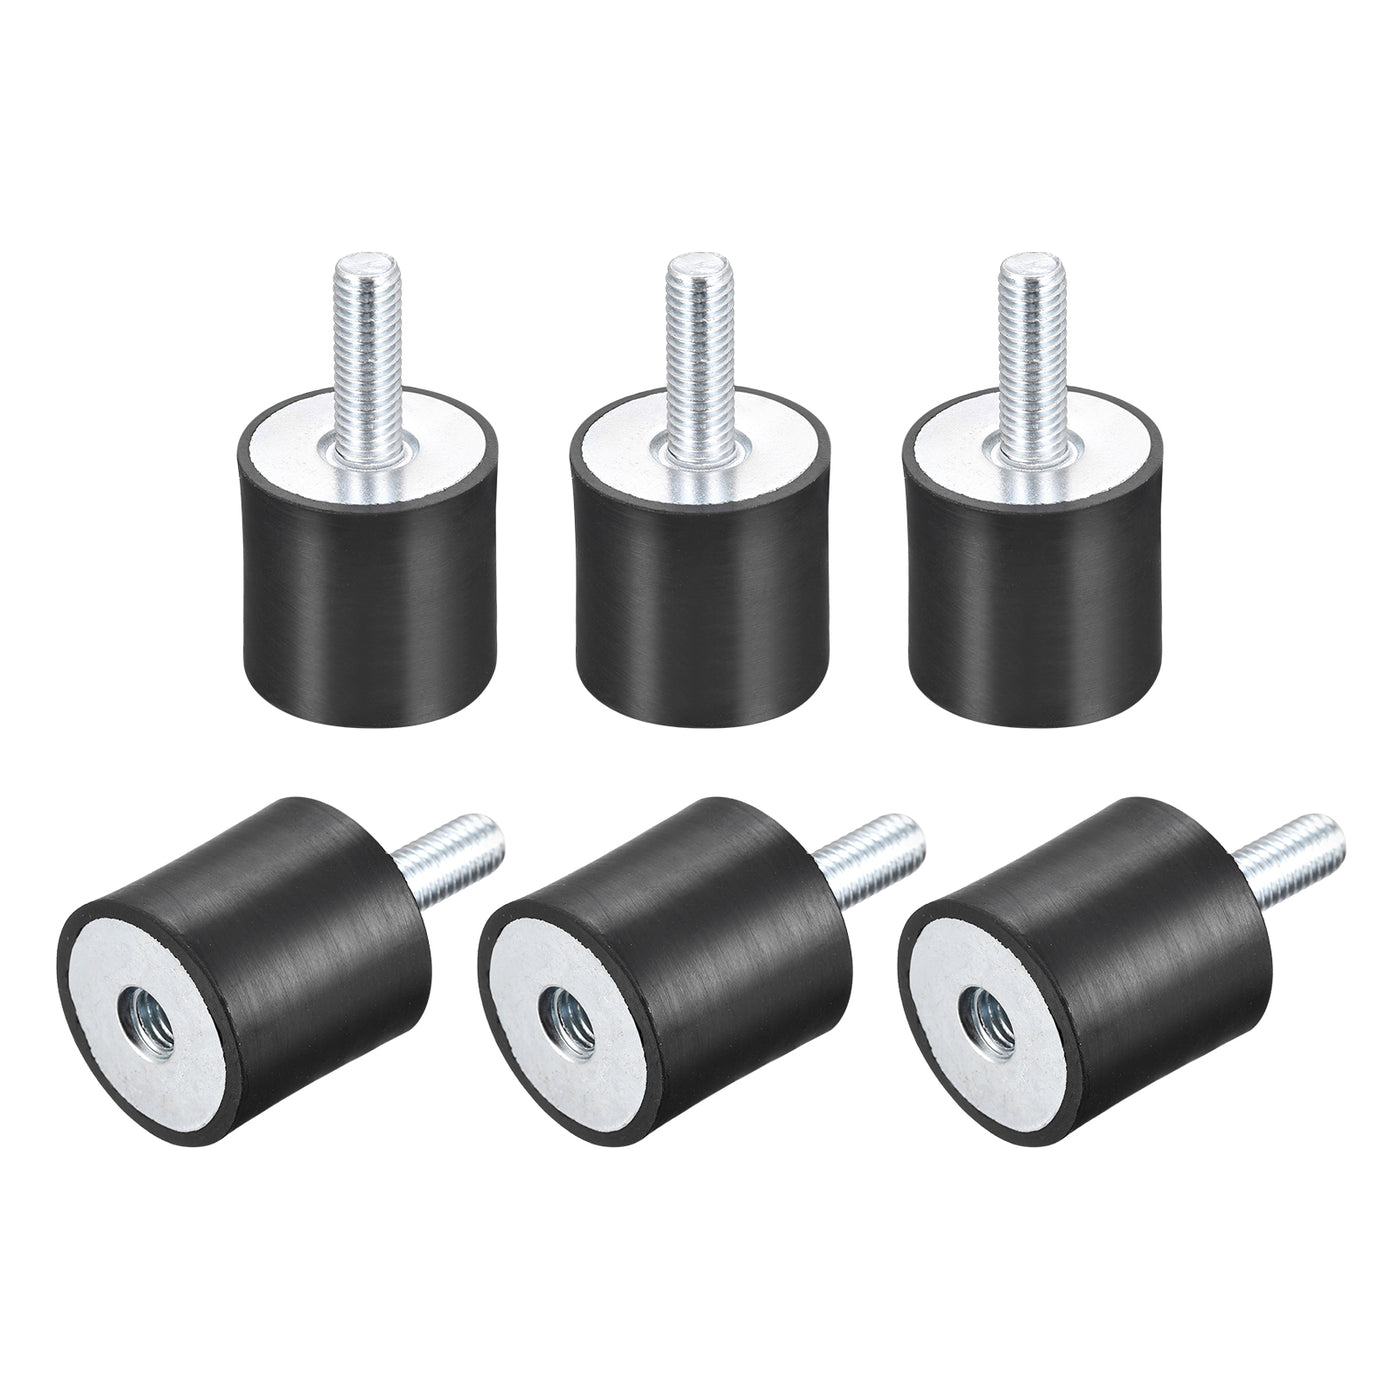 uxcell Uxcell Rubber Mount 6pcs M8 Male/Female Vibration Isolator Shock Absorber, D30mmxH30mm